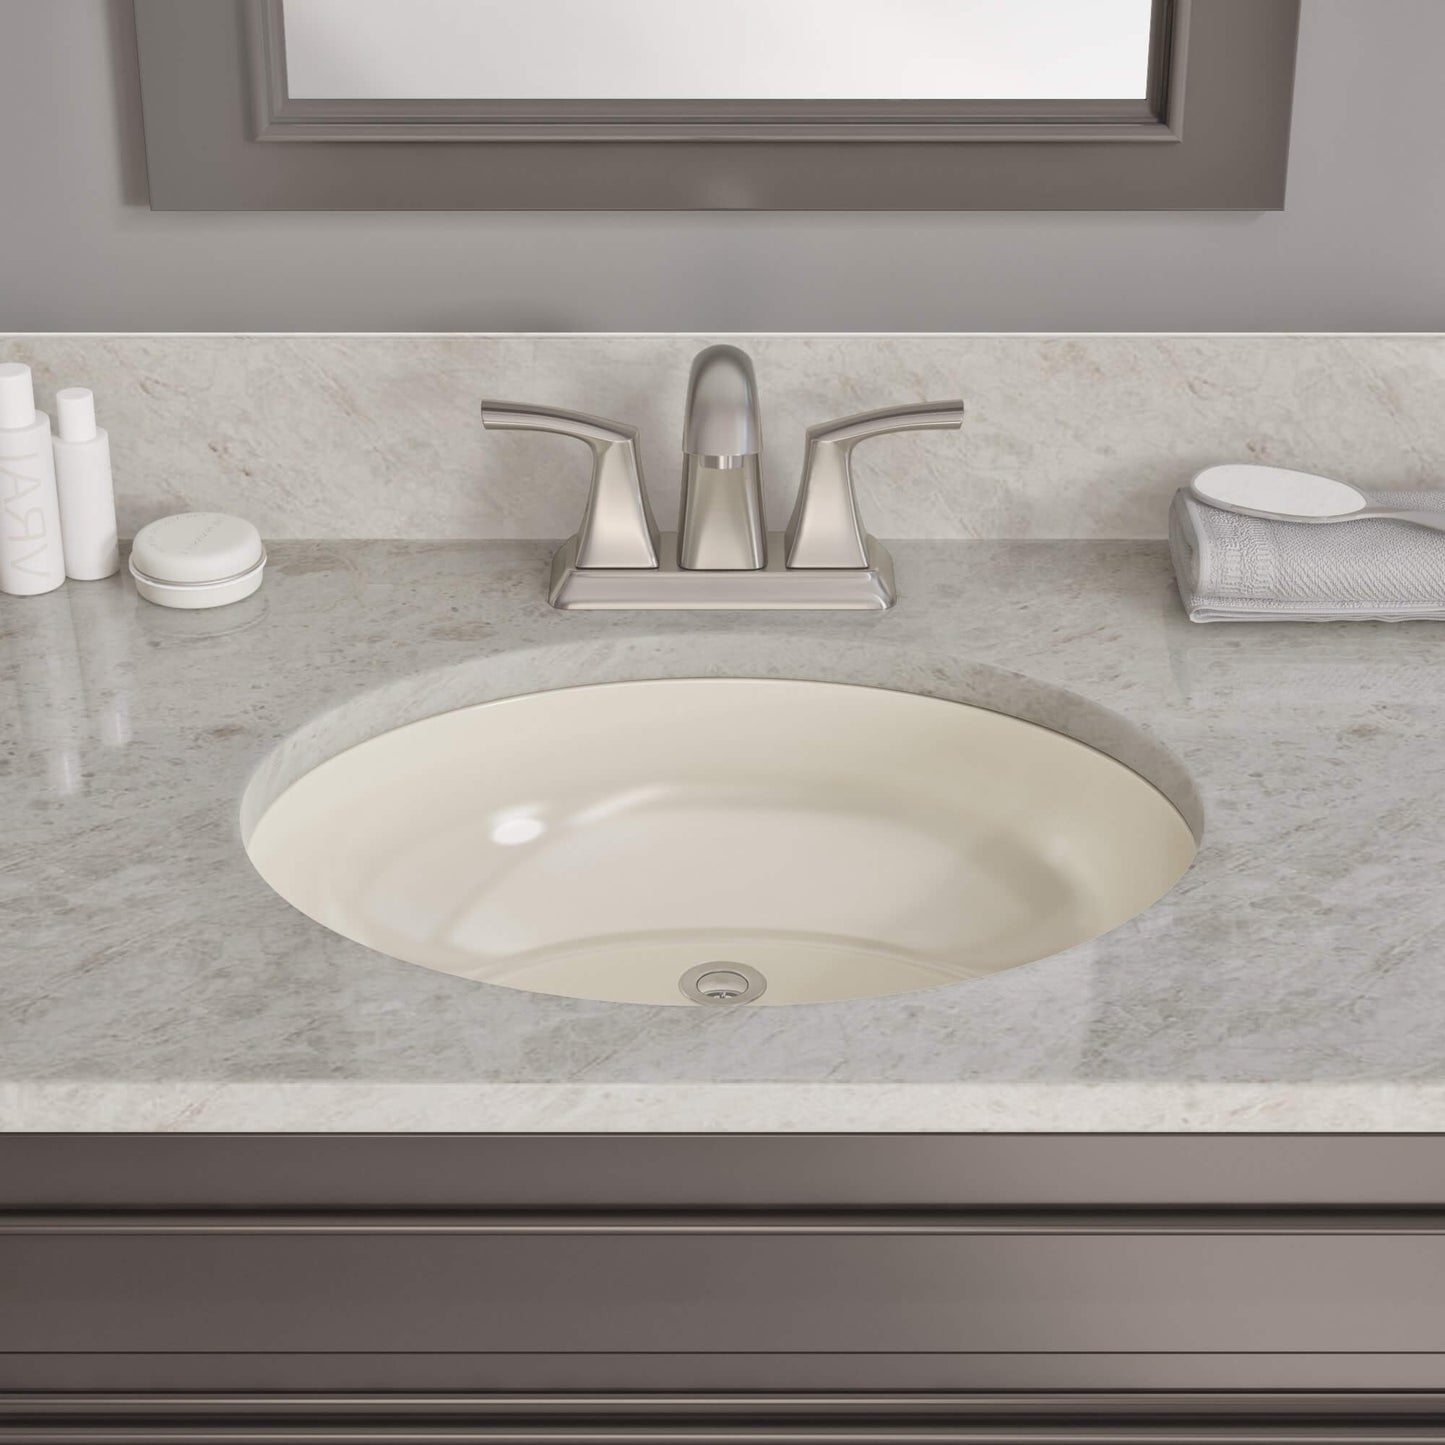 The elegant beauty of marble granite enhances a bathroom featuring a two-handle faucet paired with an undermount white sink